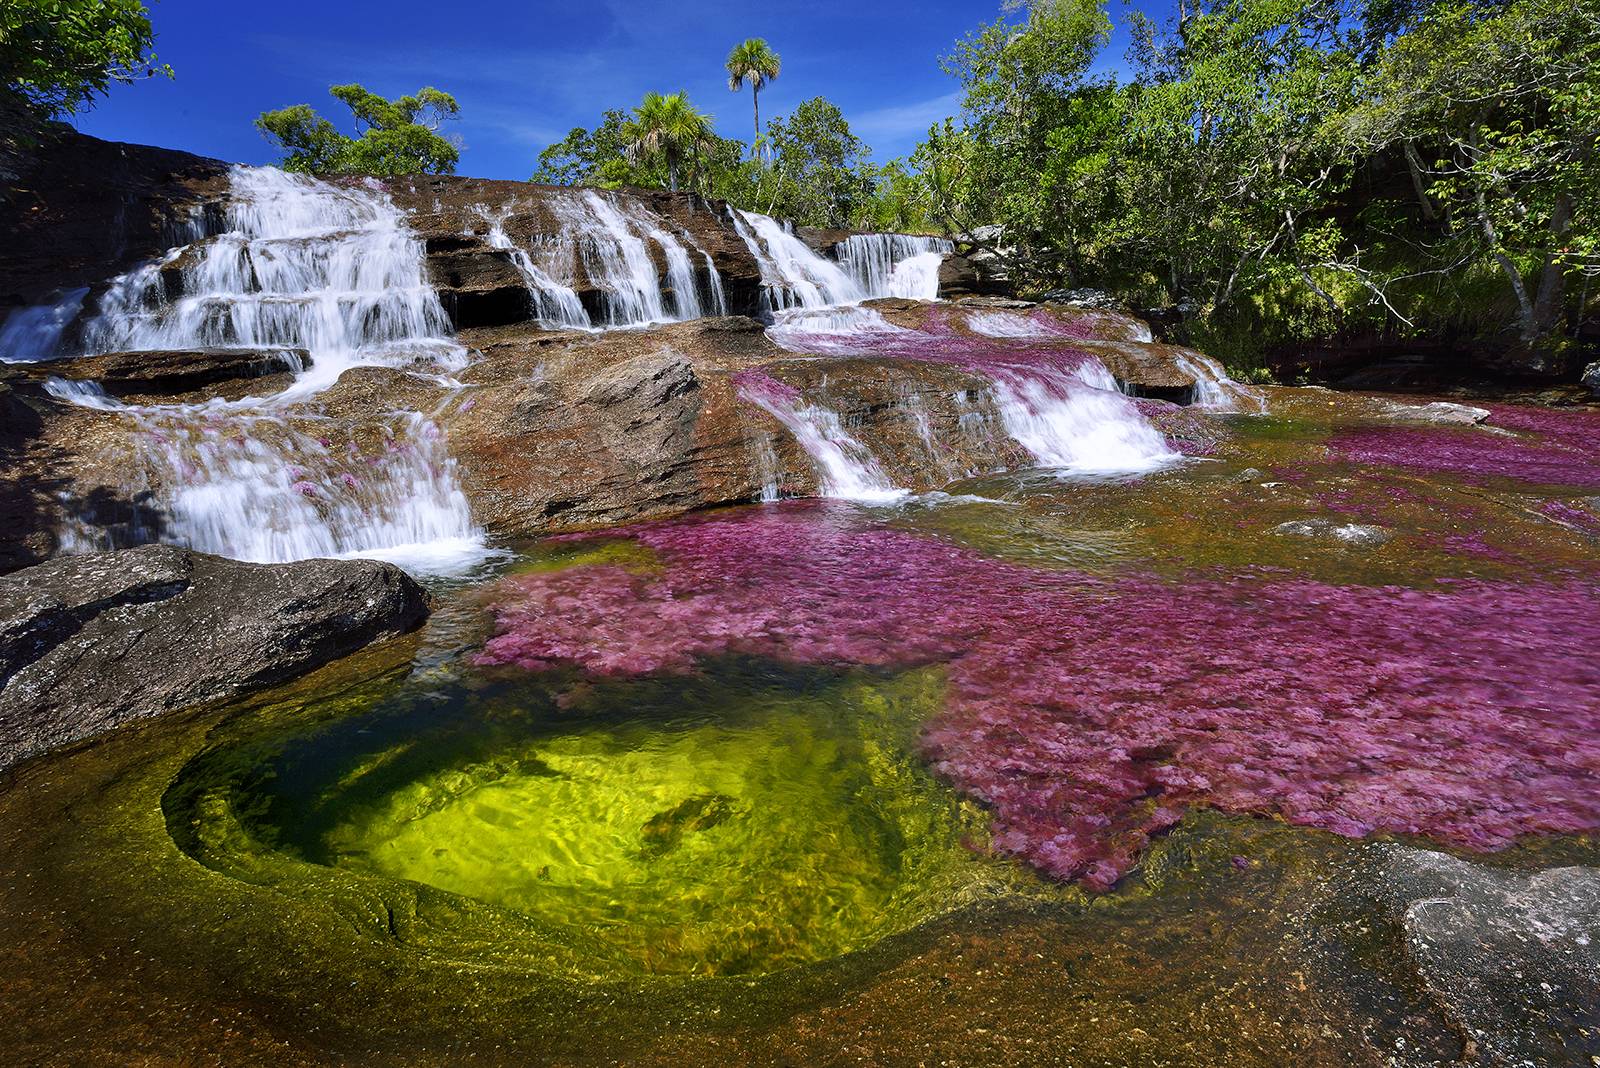 World Discovering Earth's Most Bizarre Landscapes : Top 14 Natural Wonders